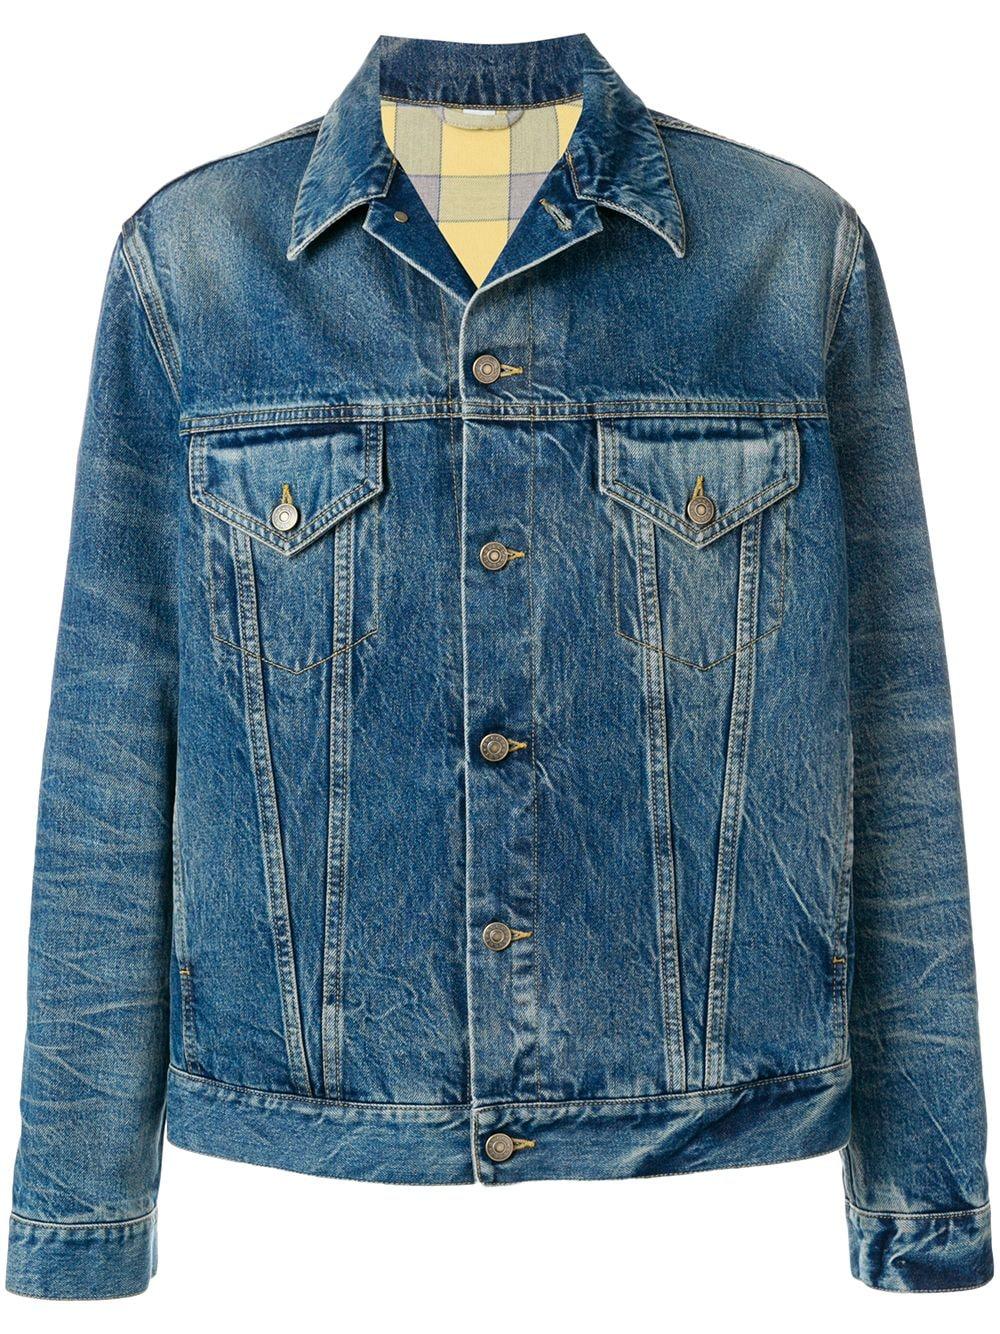 Gucci Embroidered Denim Jacket in Blue for Men - Lyst